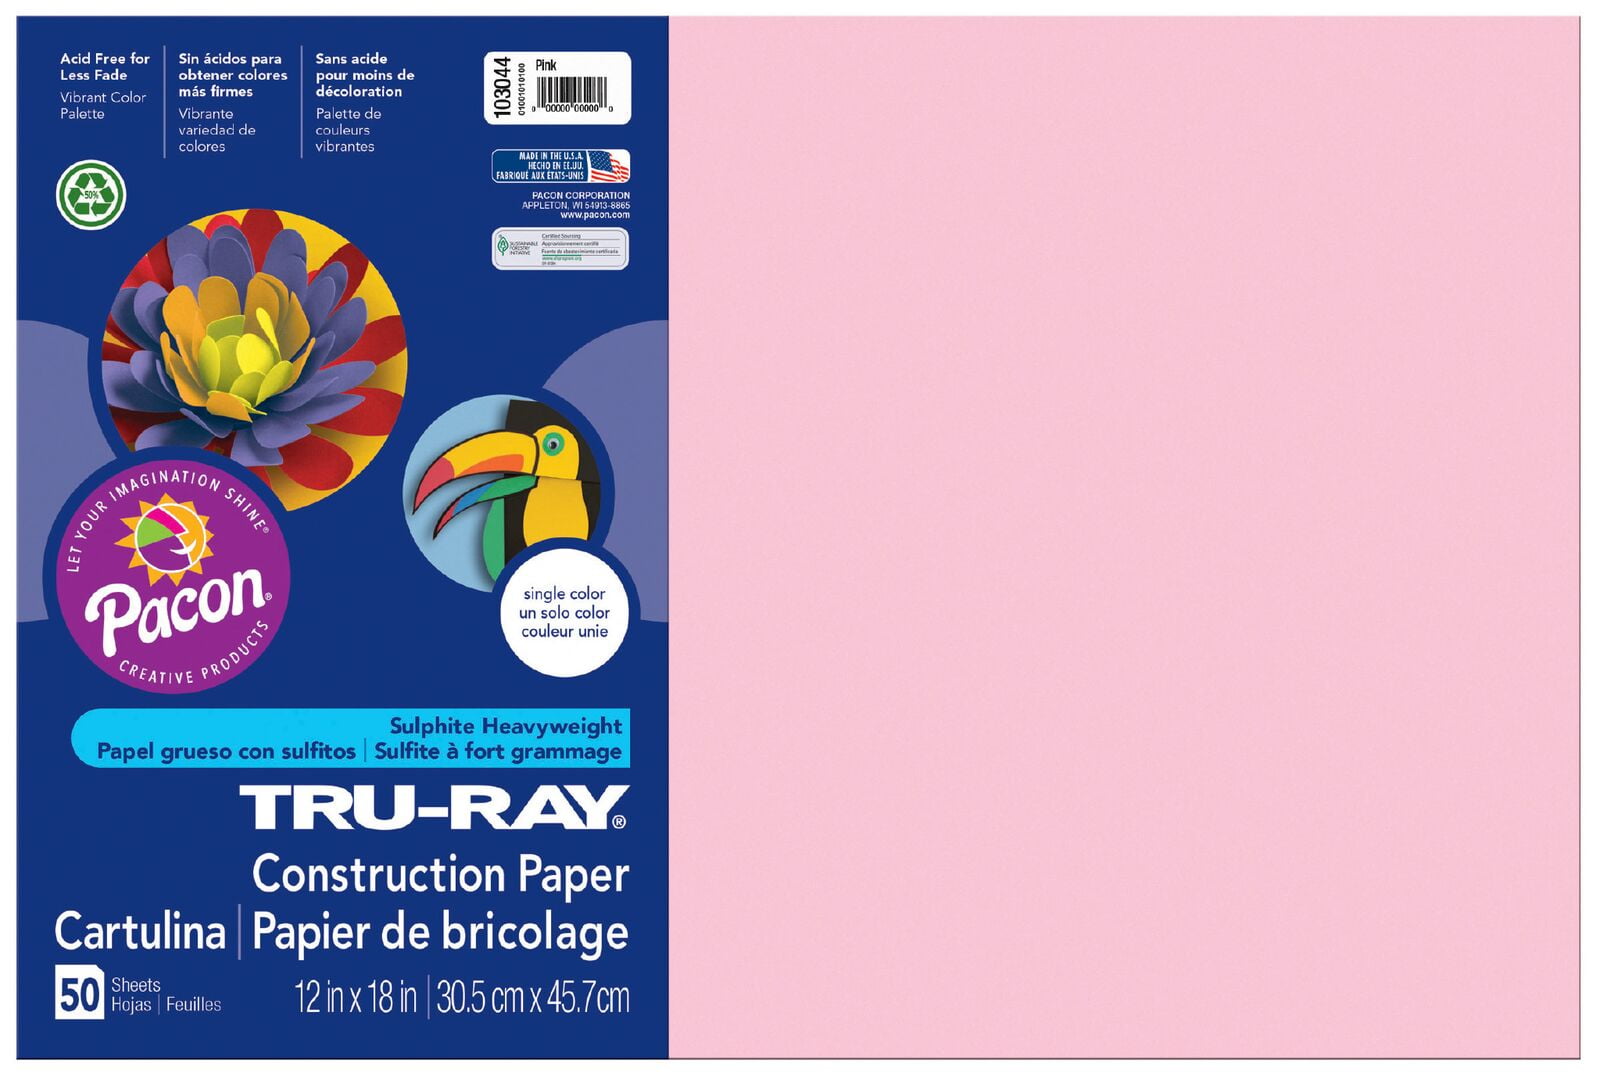 Construction Paper Brown 12 x 18 50 Sheets per Pack 5 Packs